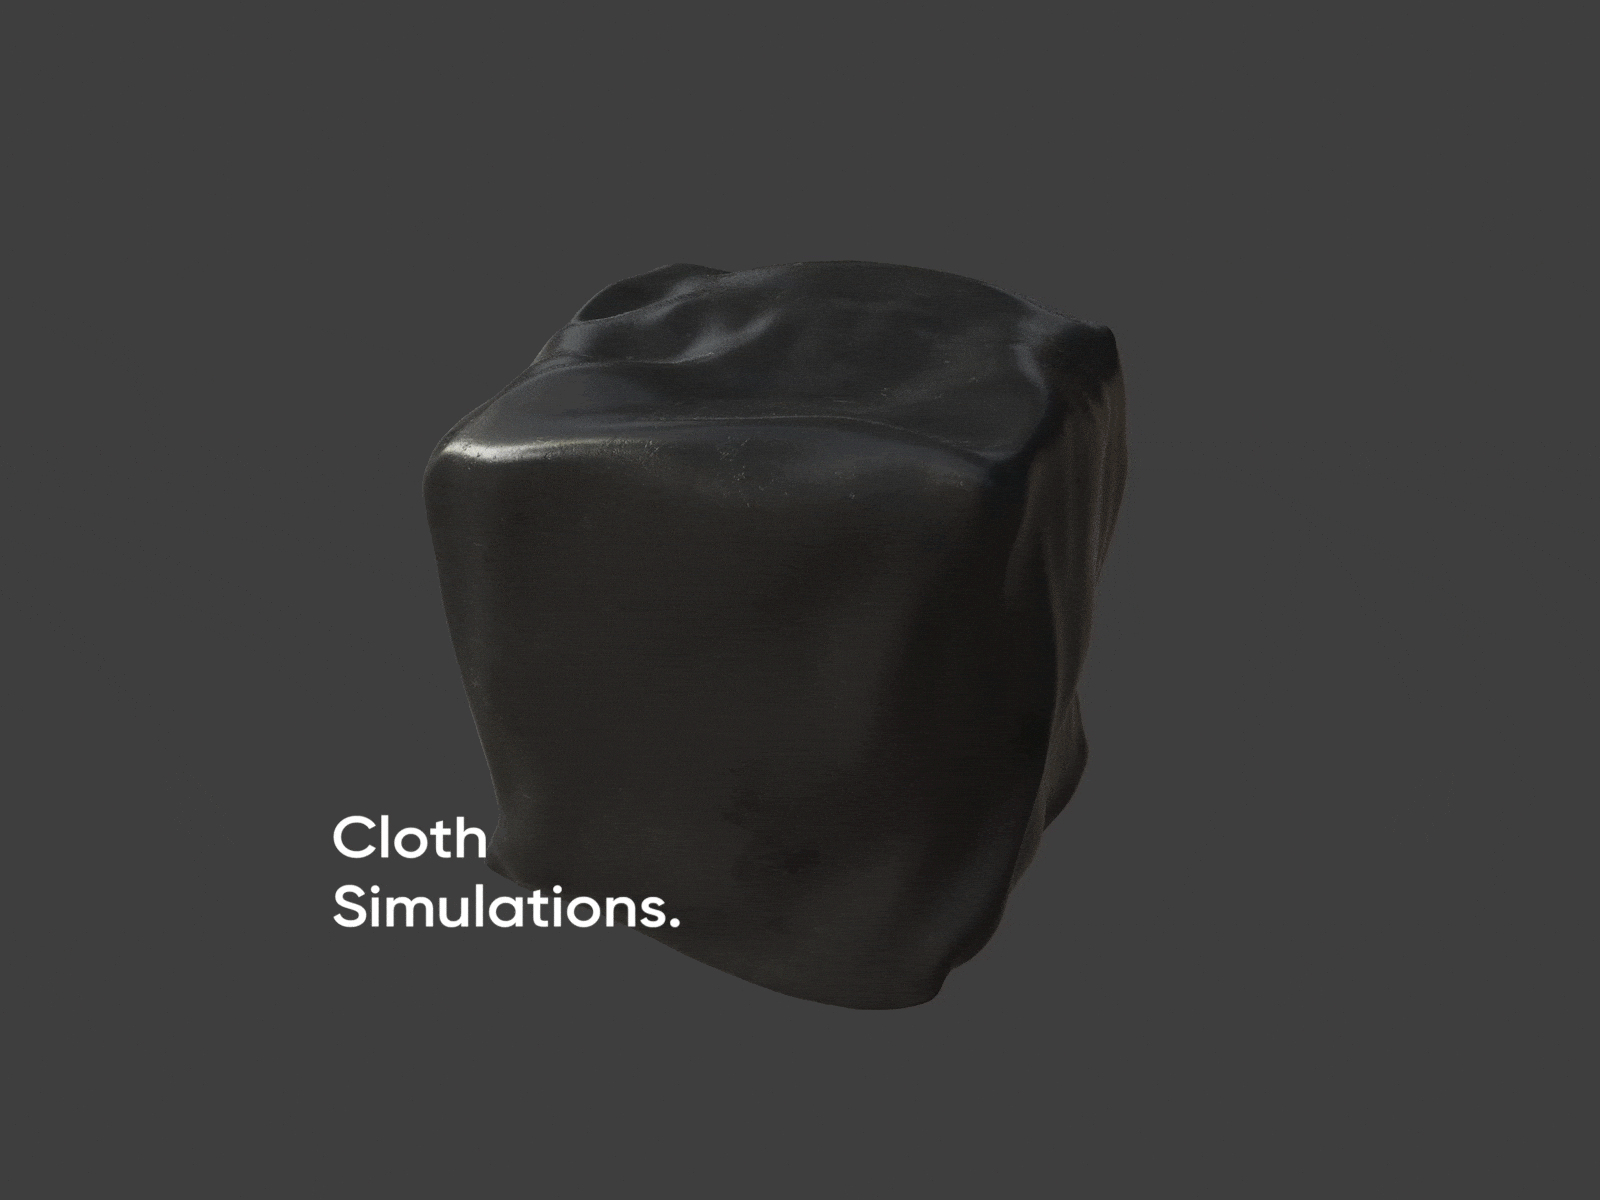 Cloth Simulations 3dsmax after effects aftereffects animated gif animation c4d cinema 4d cinema4d cloth clothing clothing design loop looping satisfaction satisfying simulation simulator